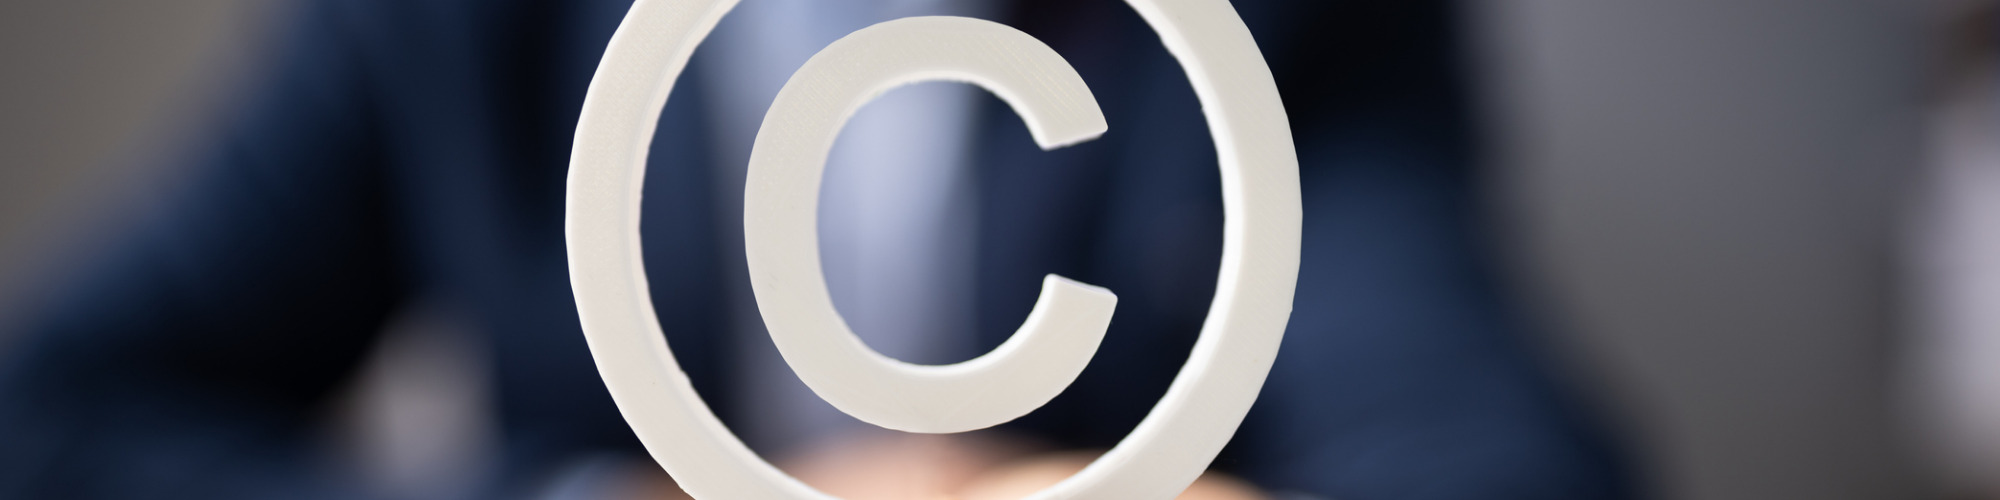 Copyright - Recent Developments & Lessons Learned